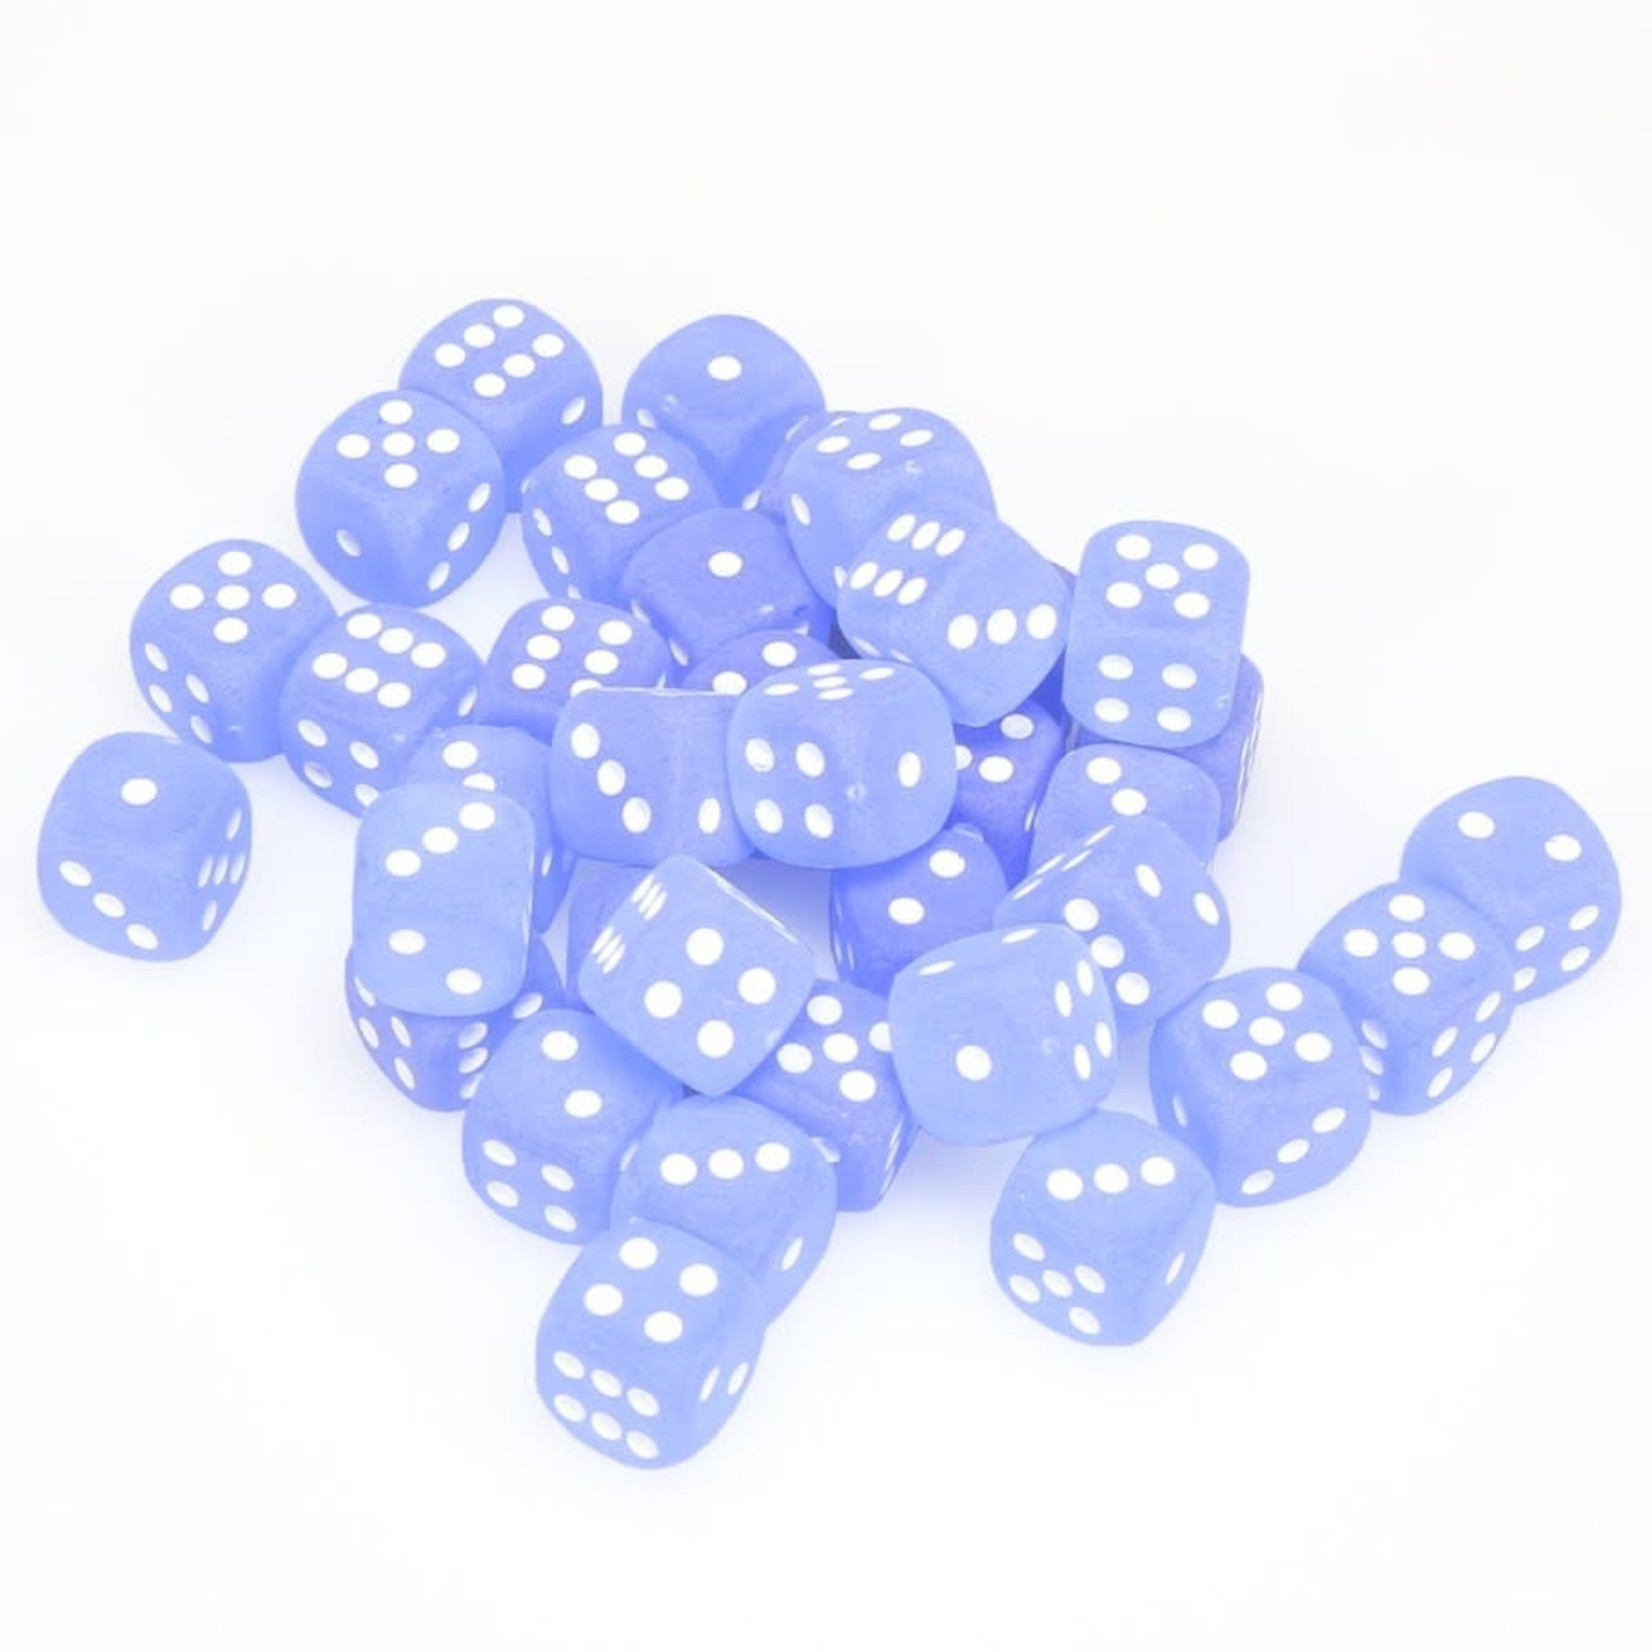 Chessex Chessex Frosted Blue with White 12 mm d6 36 die set